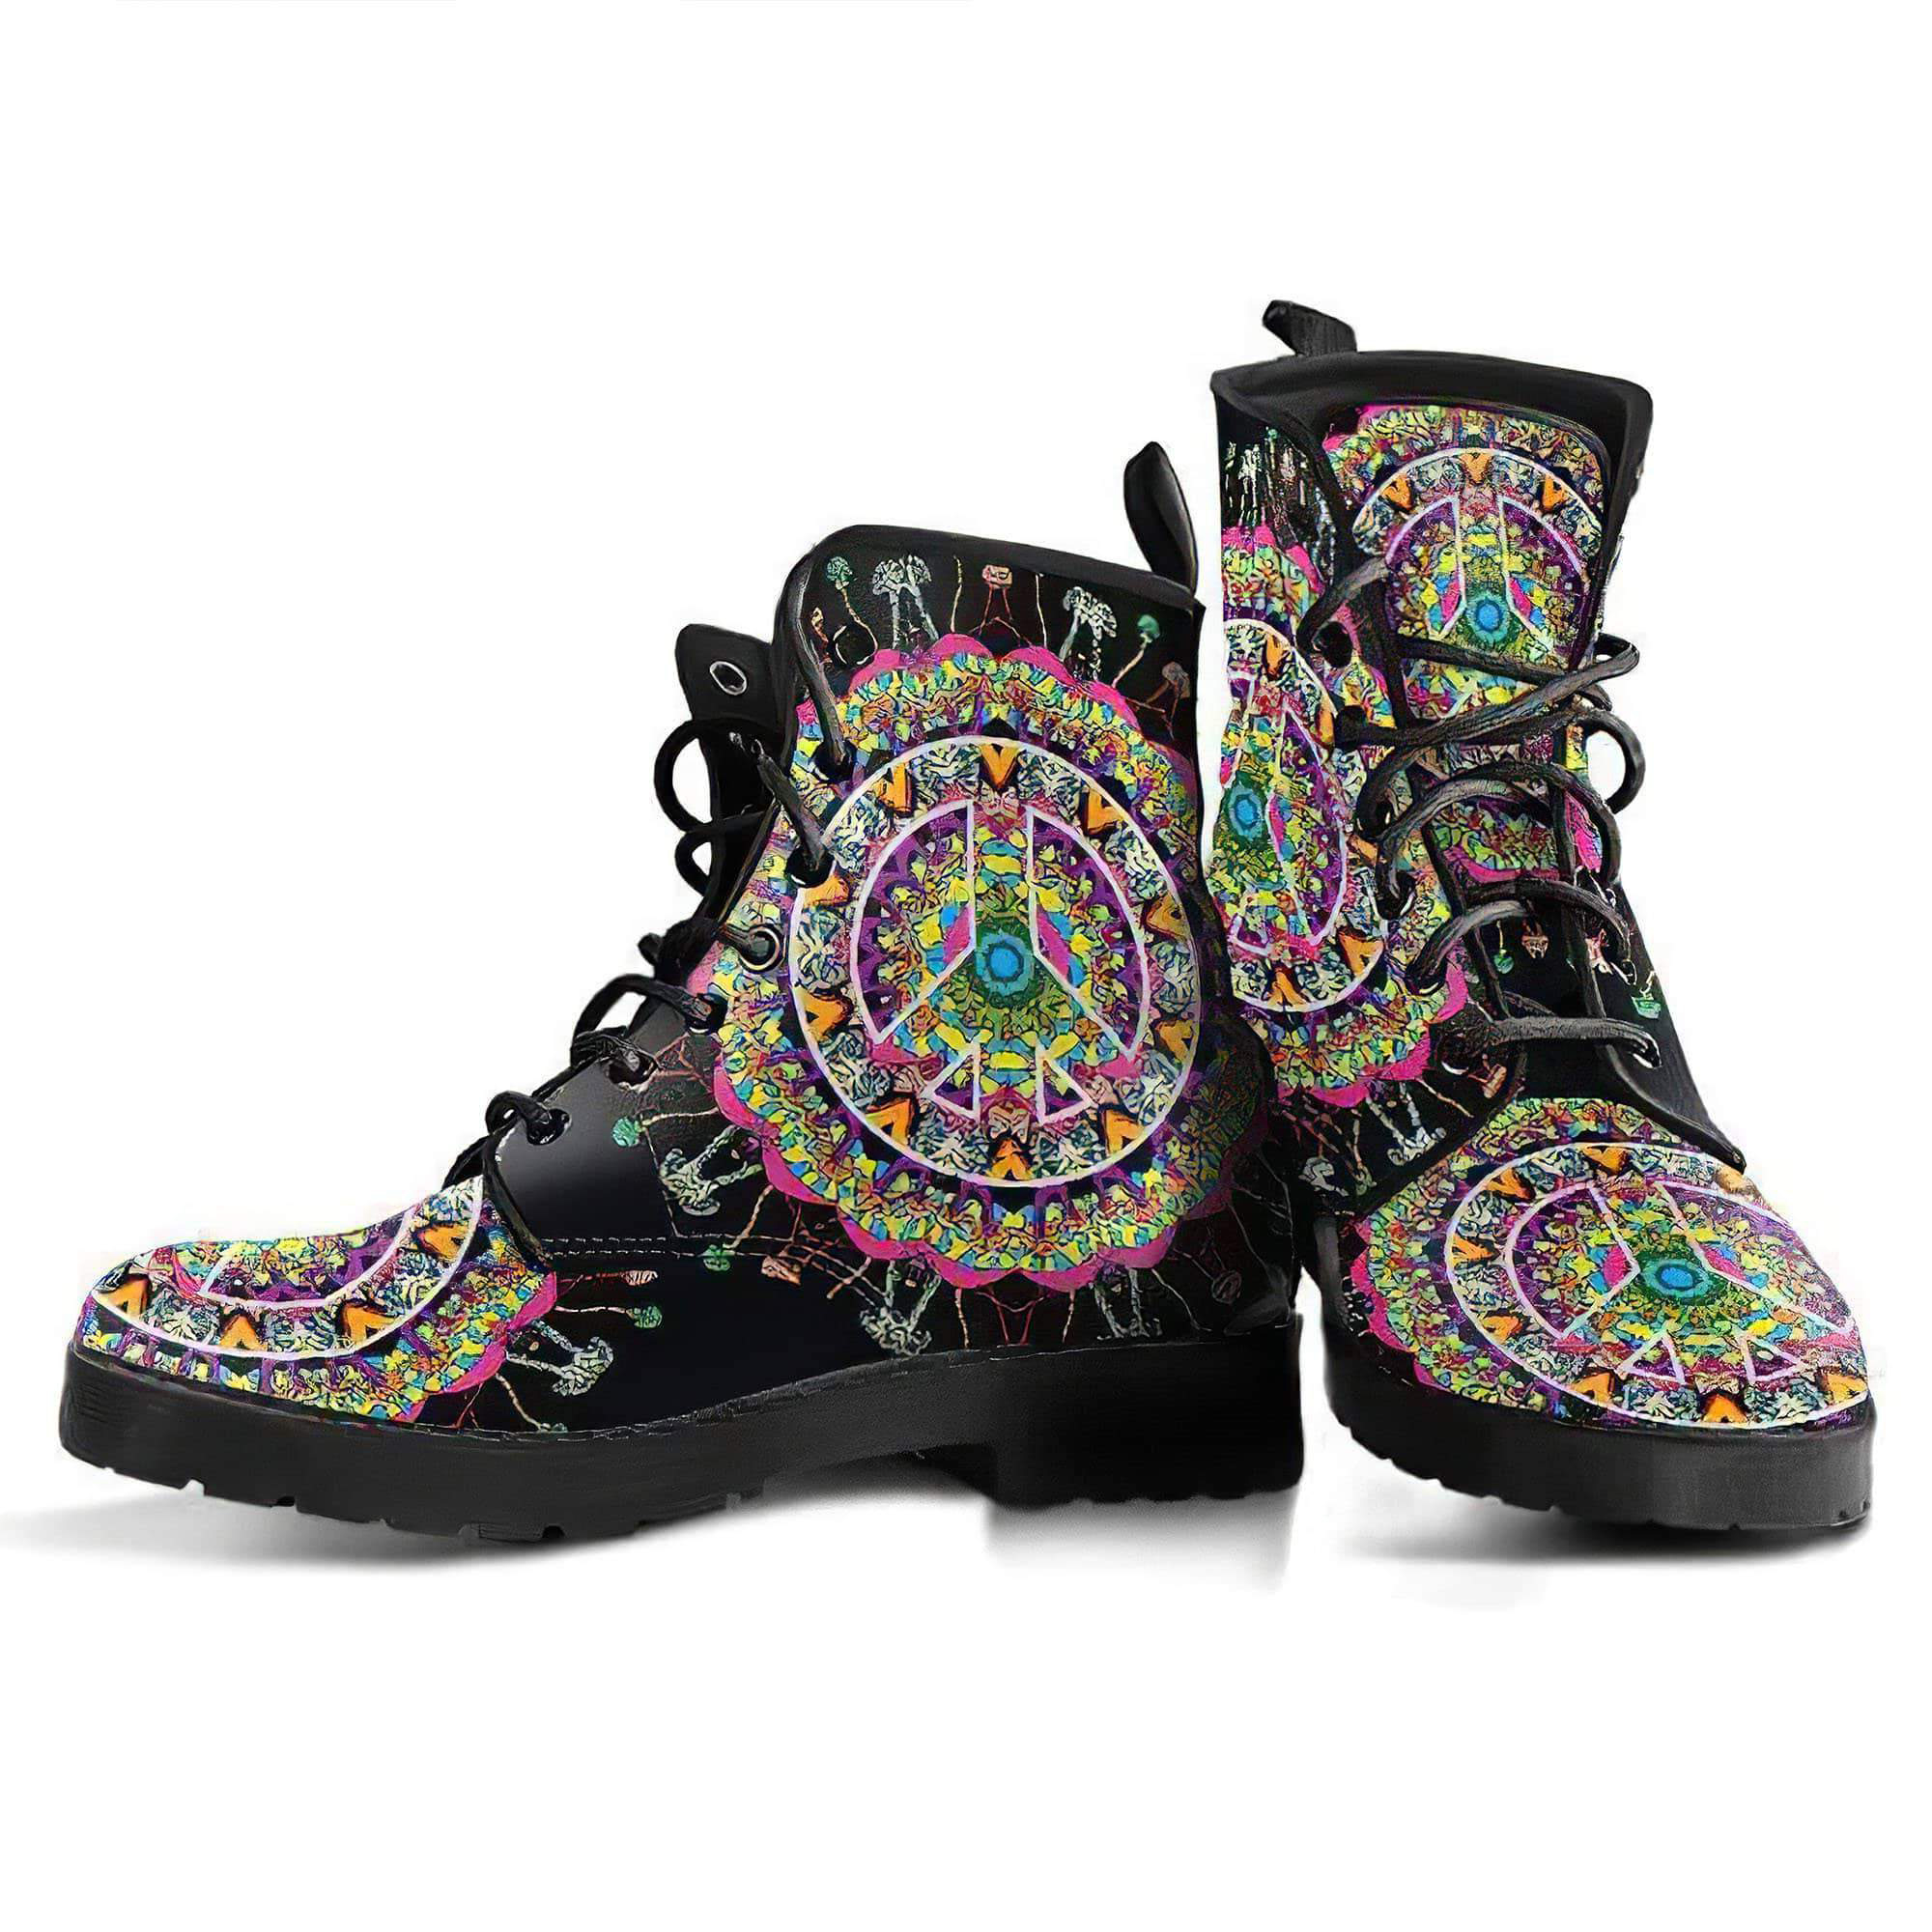 psychedelic-peace-handcrafted-boots-women-s-leather-boots-12051932446781.jpg